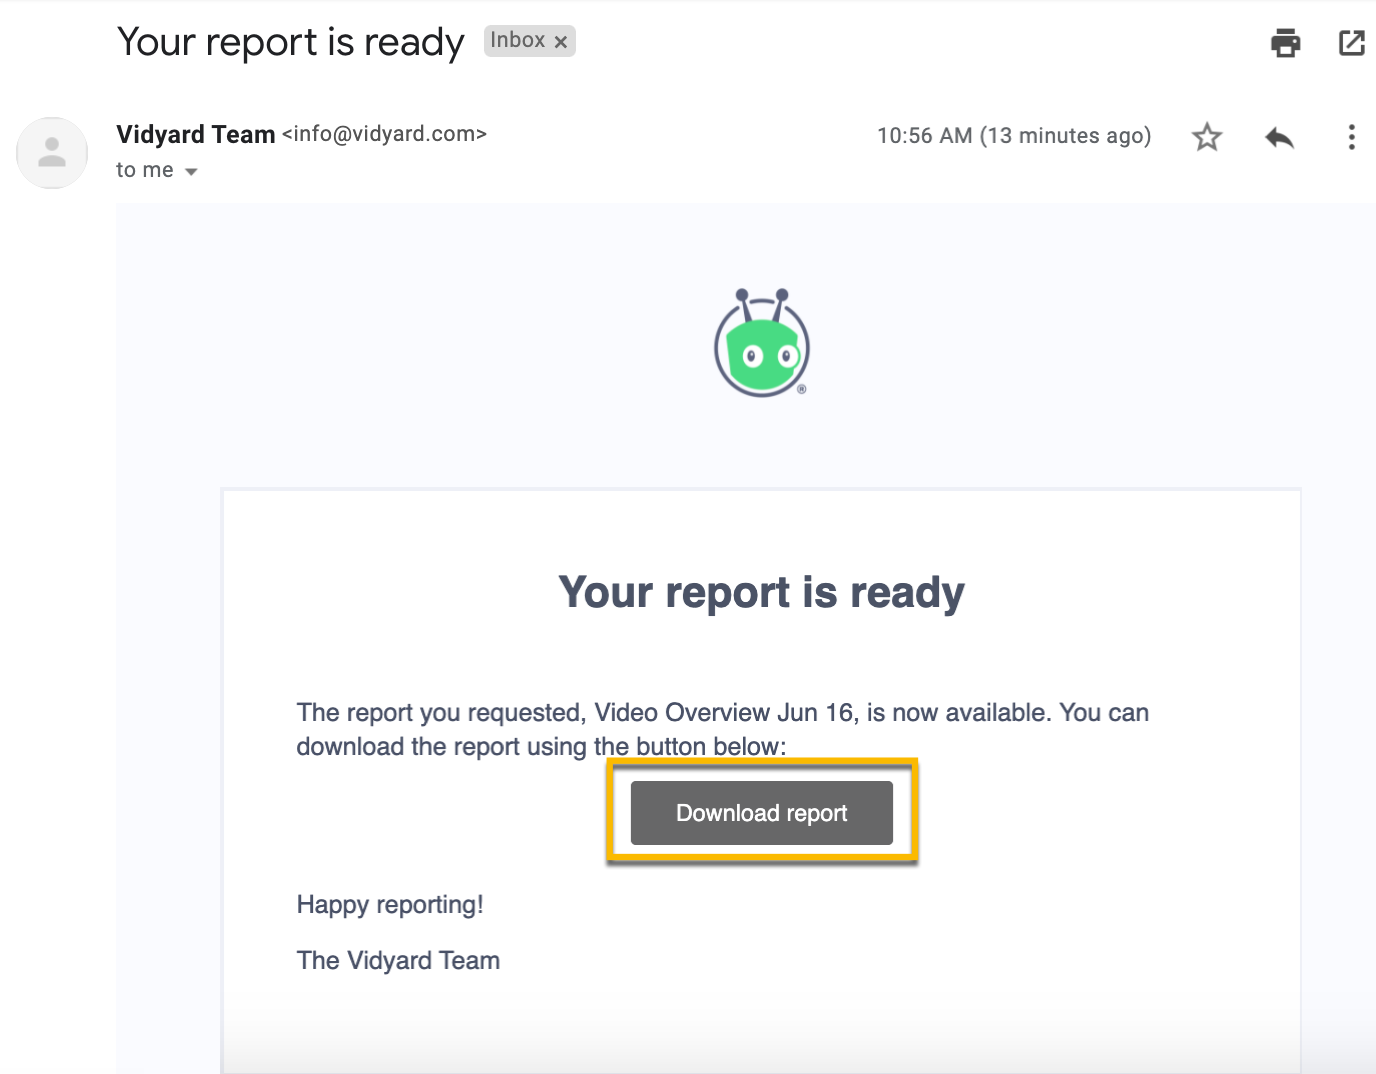 Email notifying user that their report is ready, with button to download the file